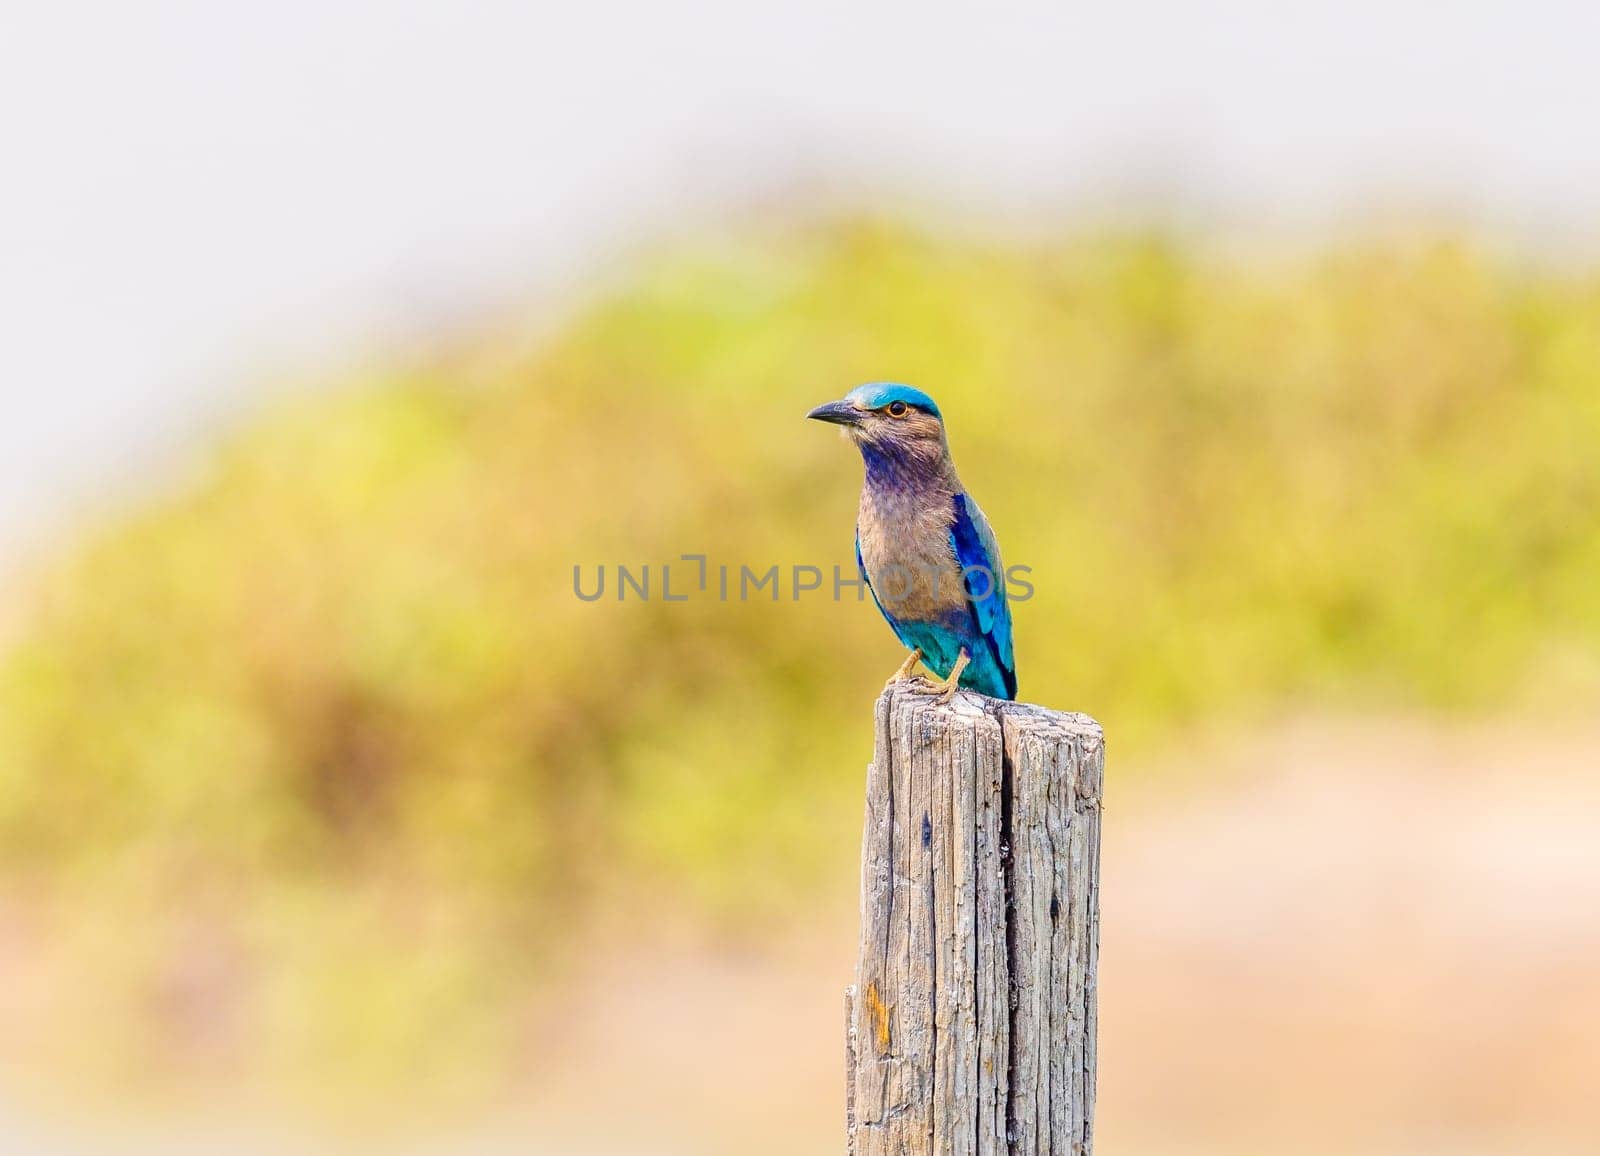 An Indochinese Roller perched on a stump in Cambodia